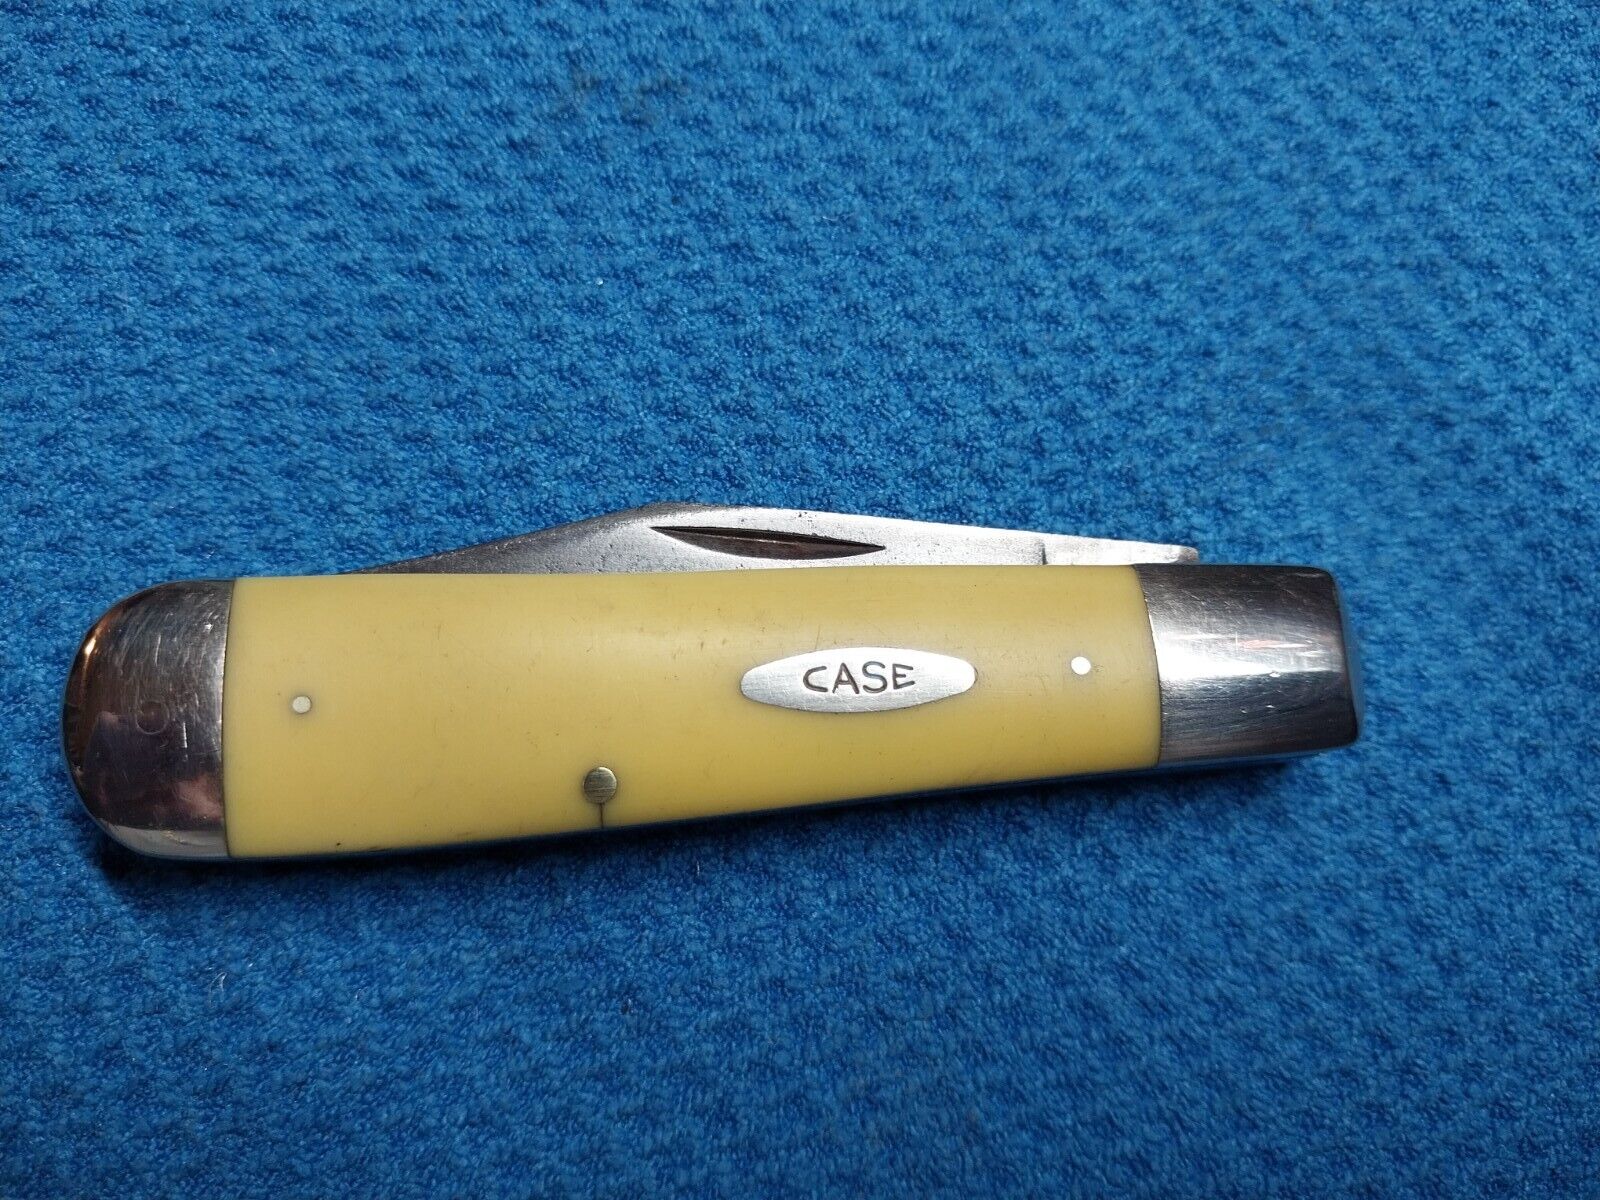 💯Vintage Casexx 1976 3299 1/2 Yellow Rail Splitter Pocket Knife Used But Nice